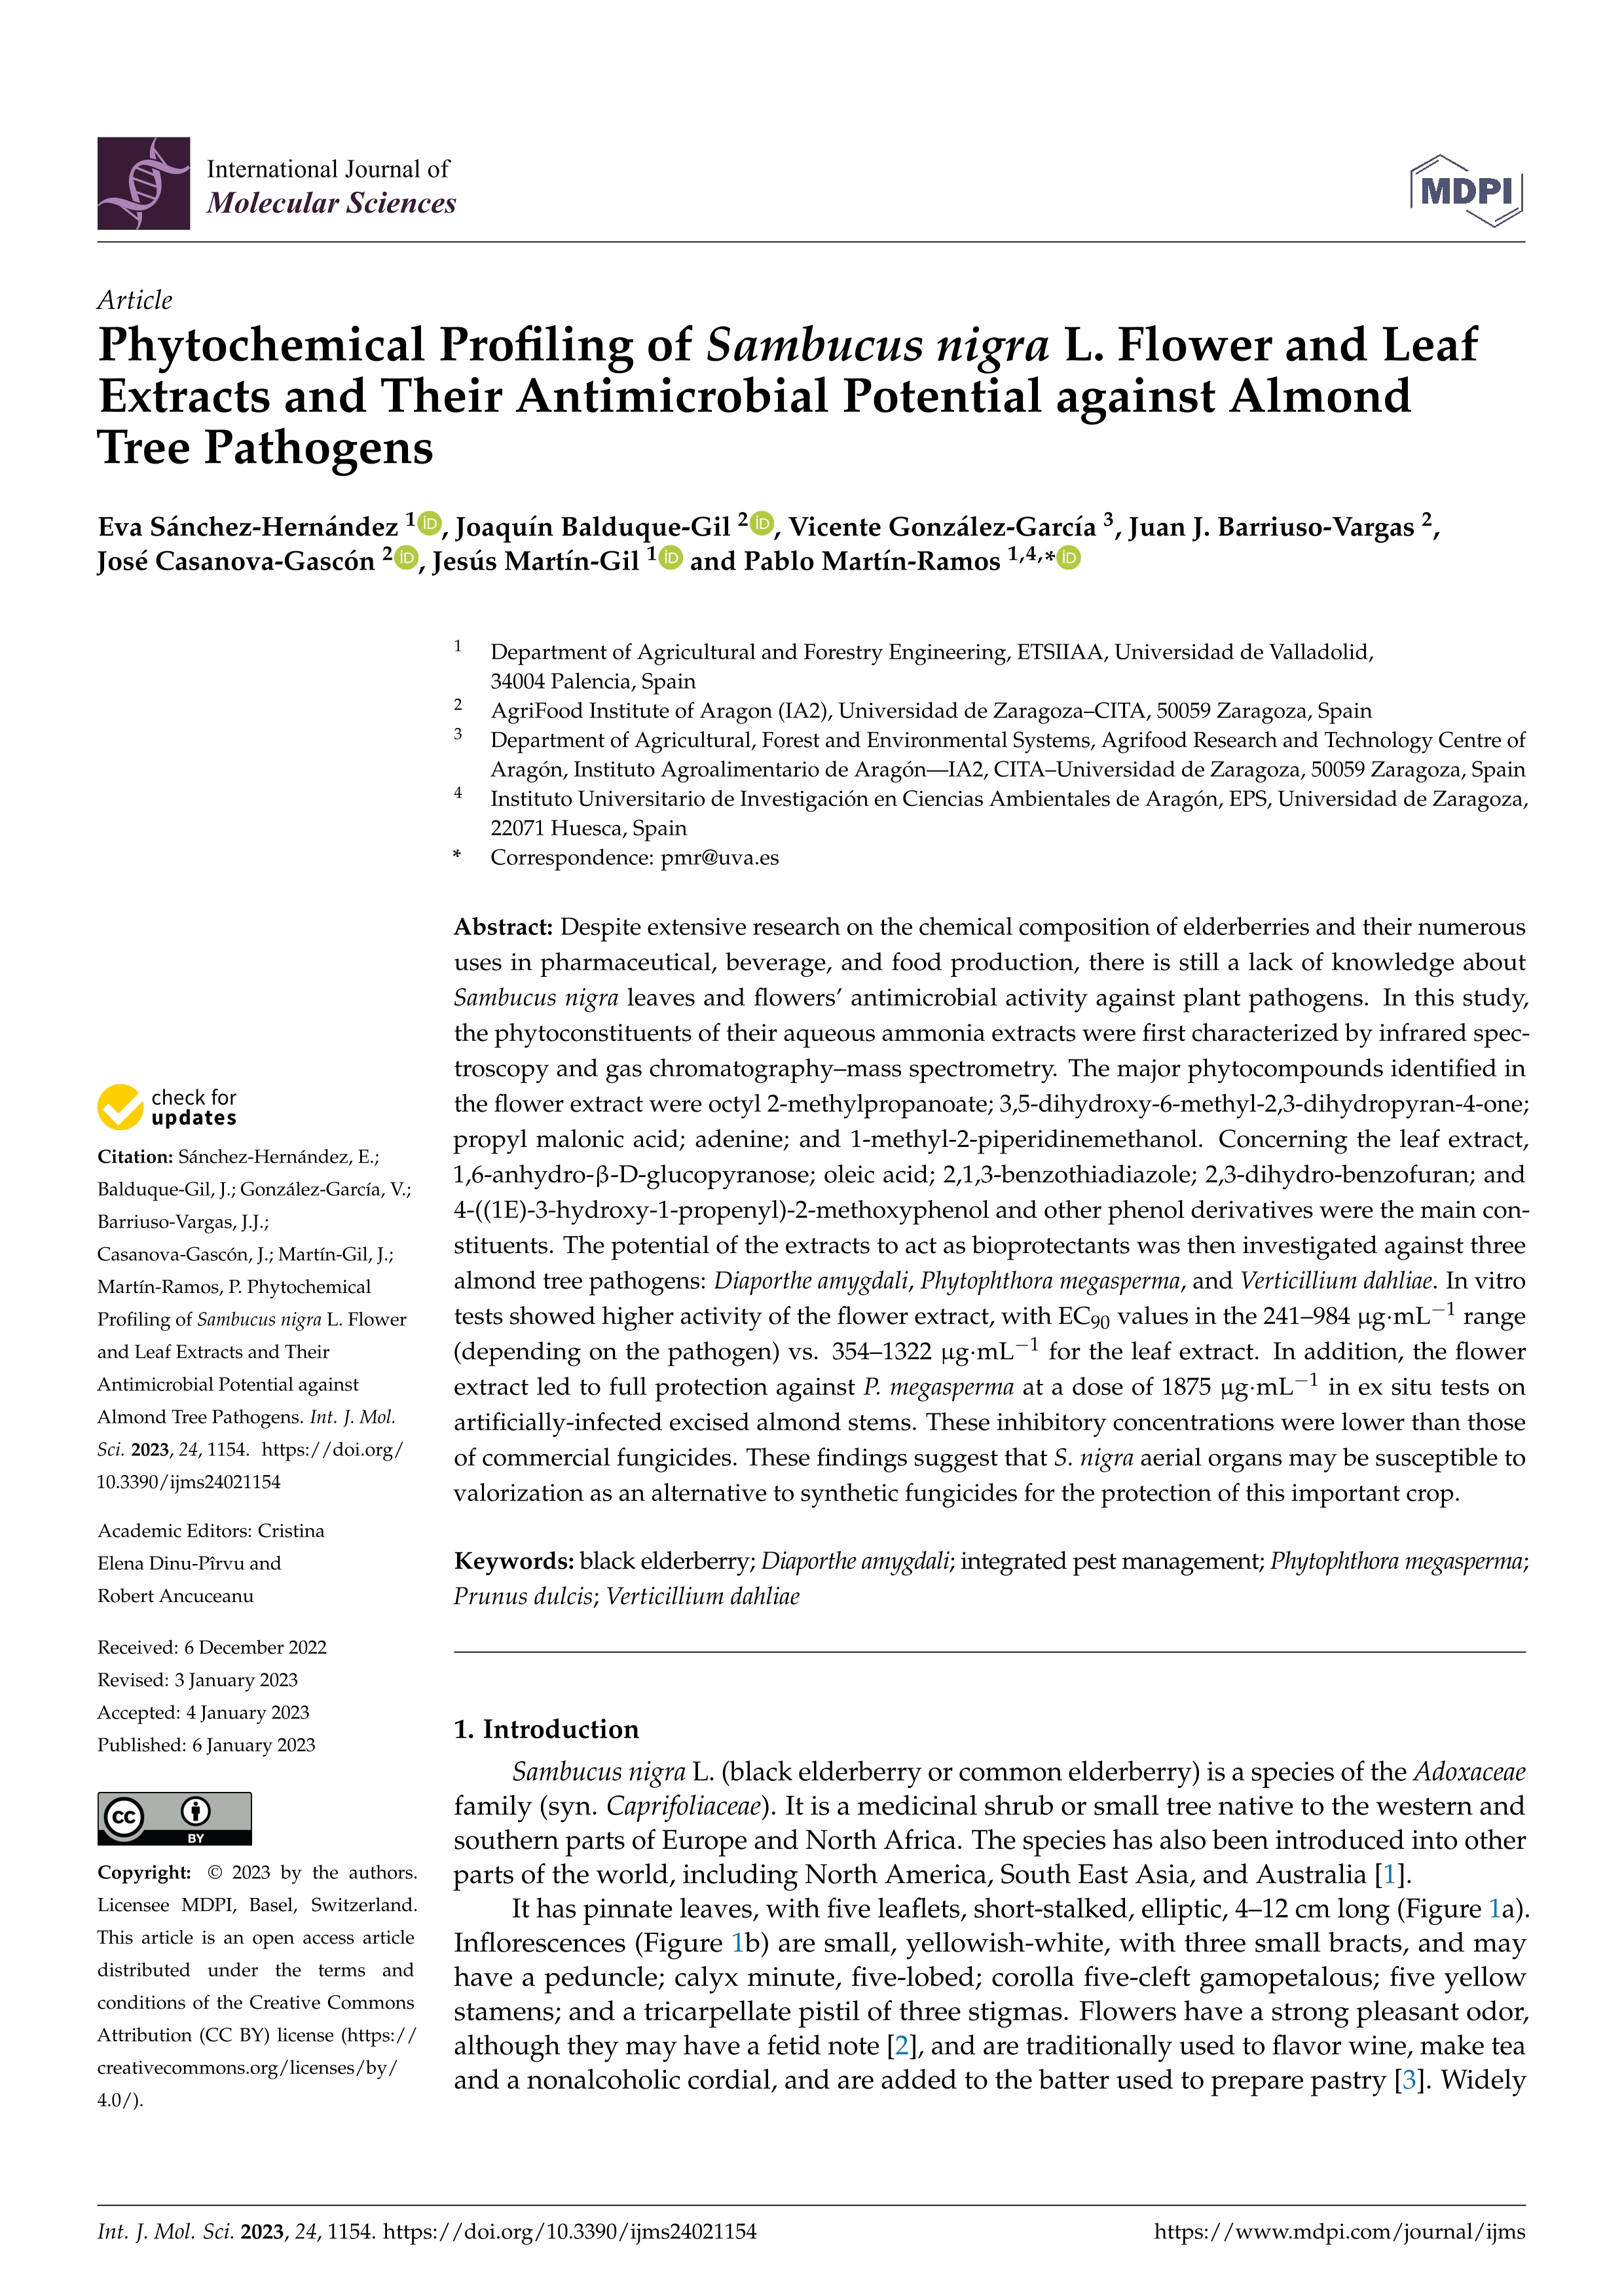 Phytochemical Profiling of Sambucus nigra L. Flower and leaf extracts and their Antimicrobial potential against almond tree pathogens